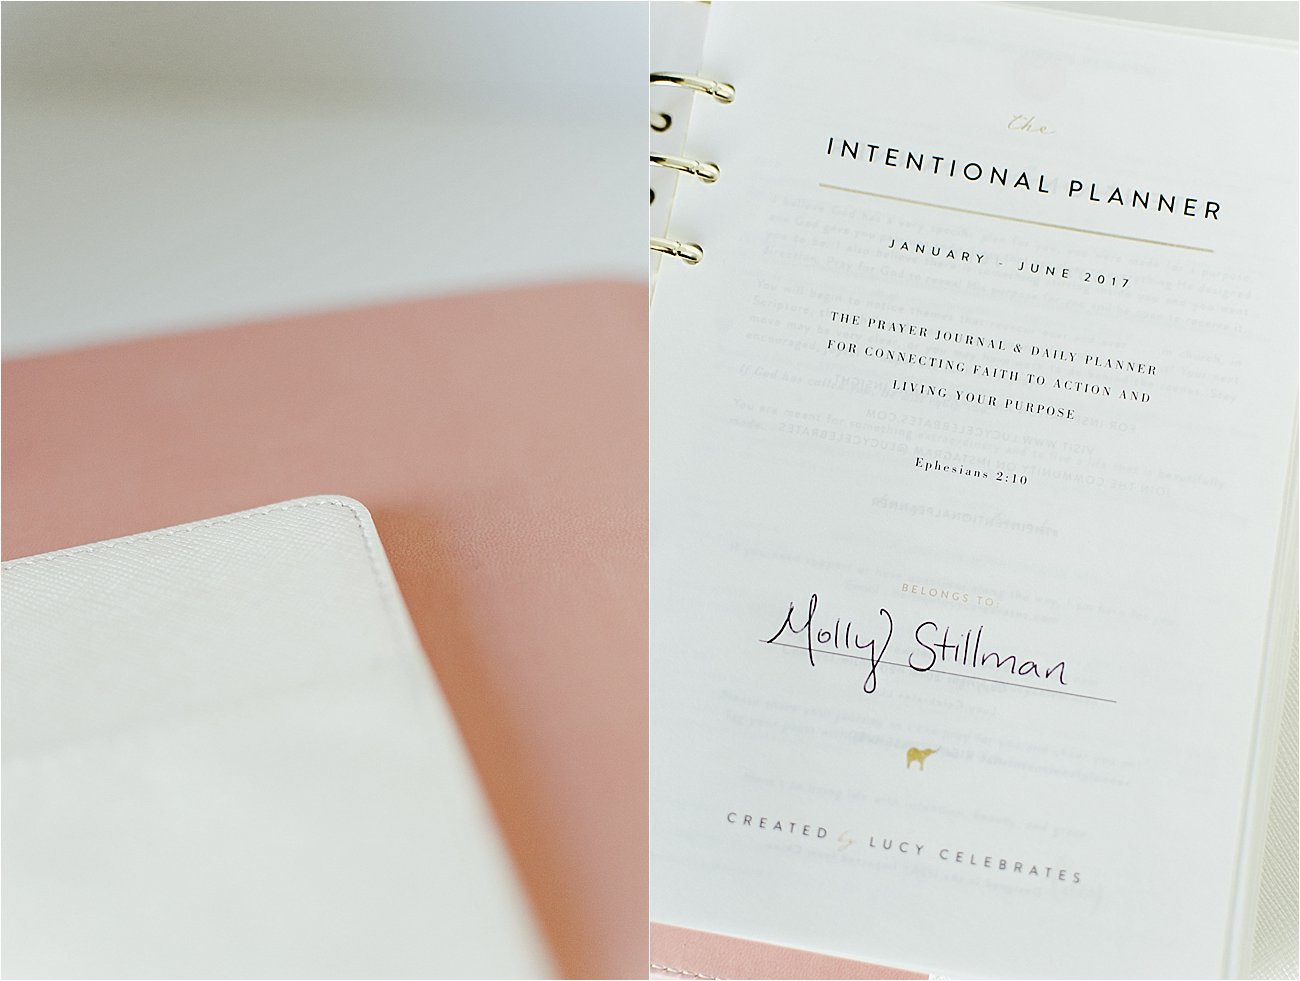 Taking on 2017 with The Intentional Planner | Intentional Planner Review - Christian Planner and Prayer Journal Review (6)